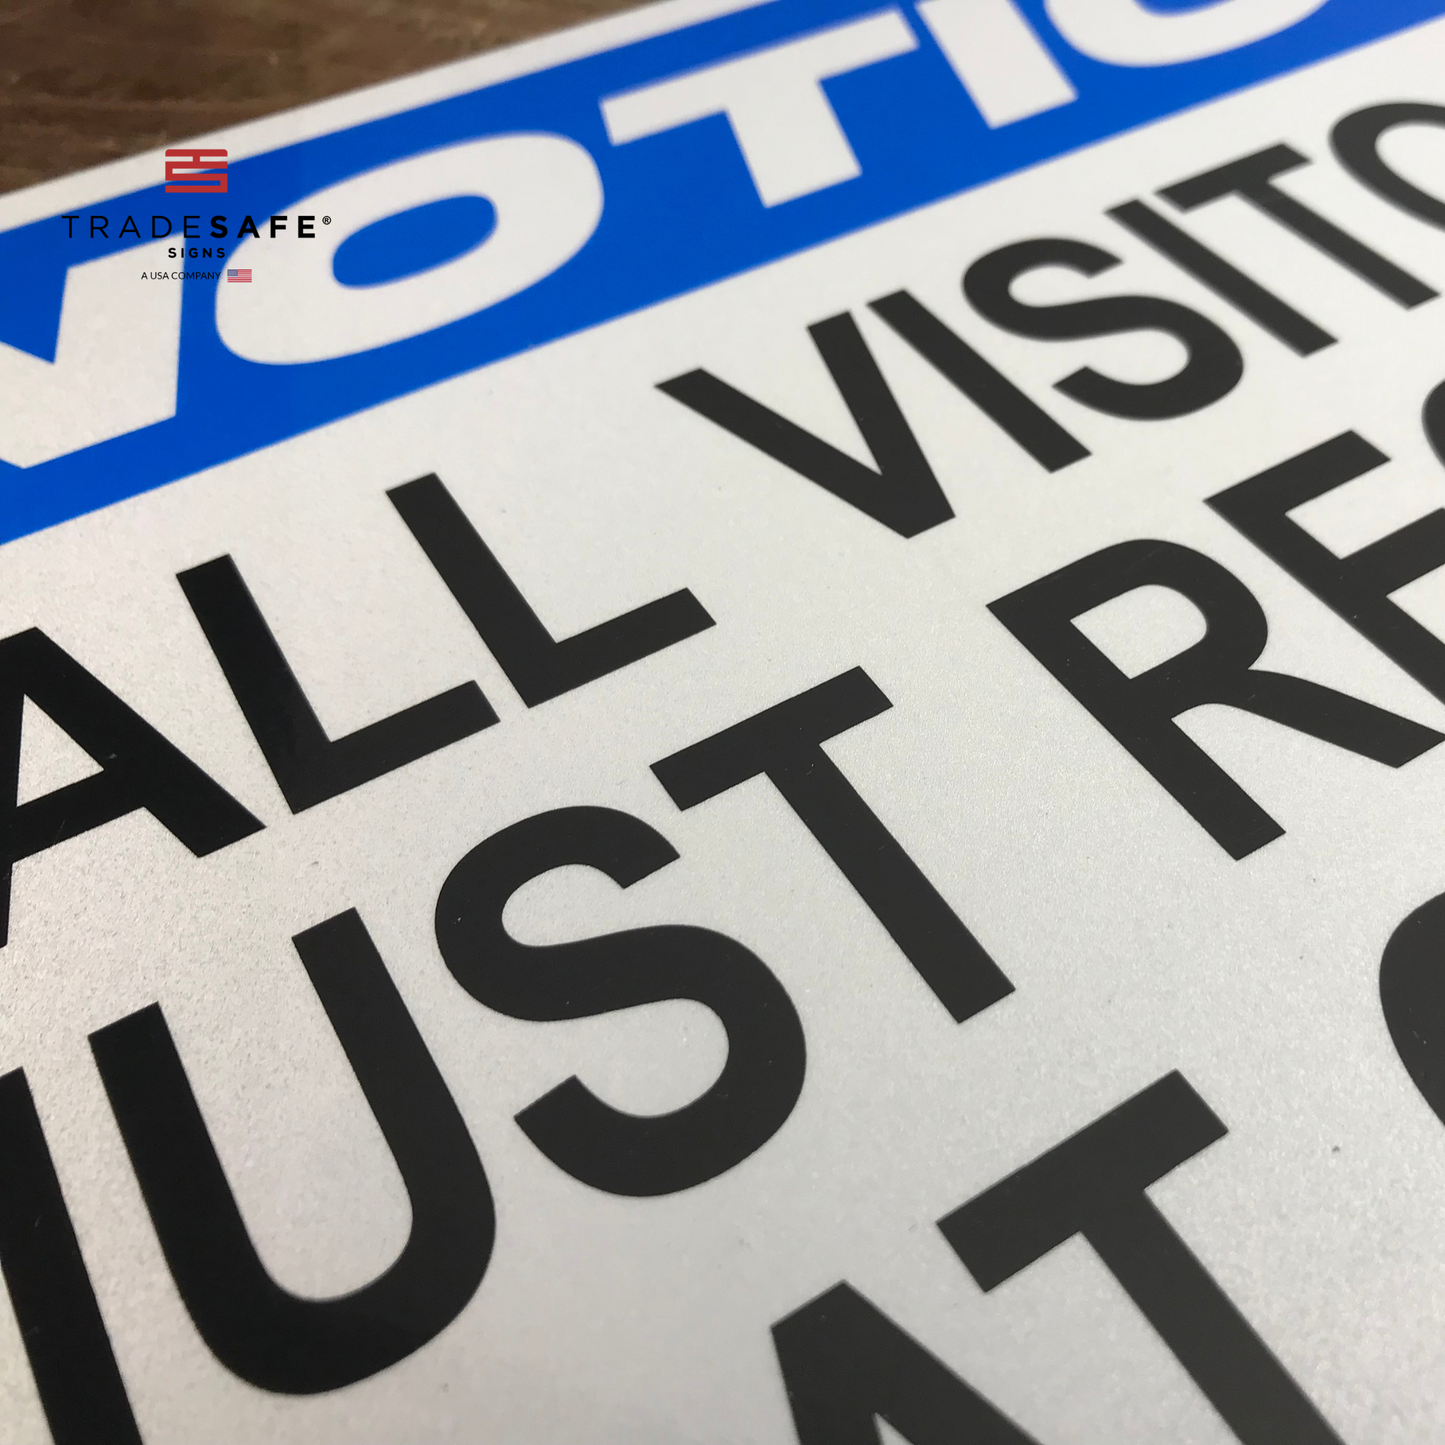 close-up of notice sign with the text "all visitors must register at office"